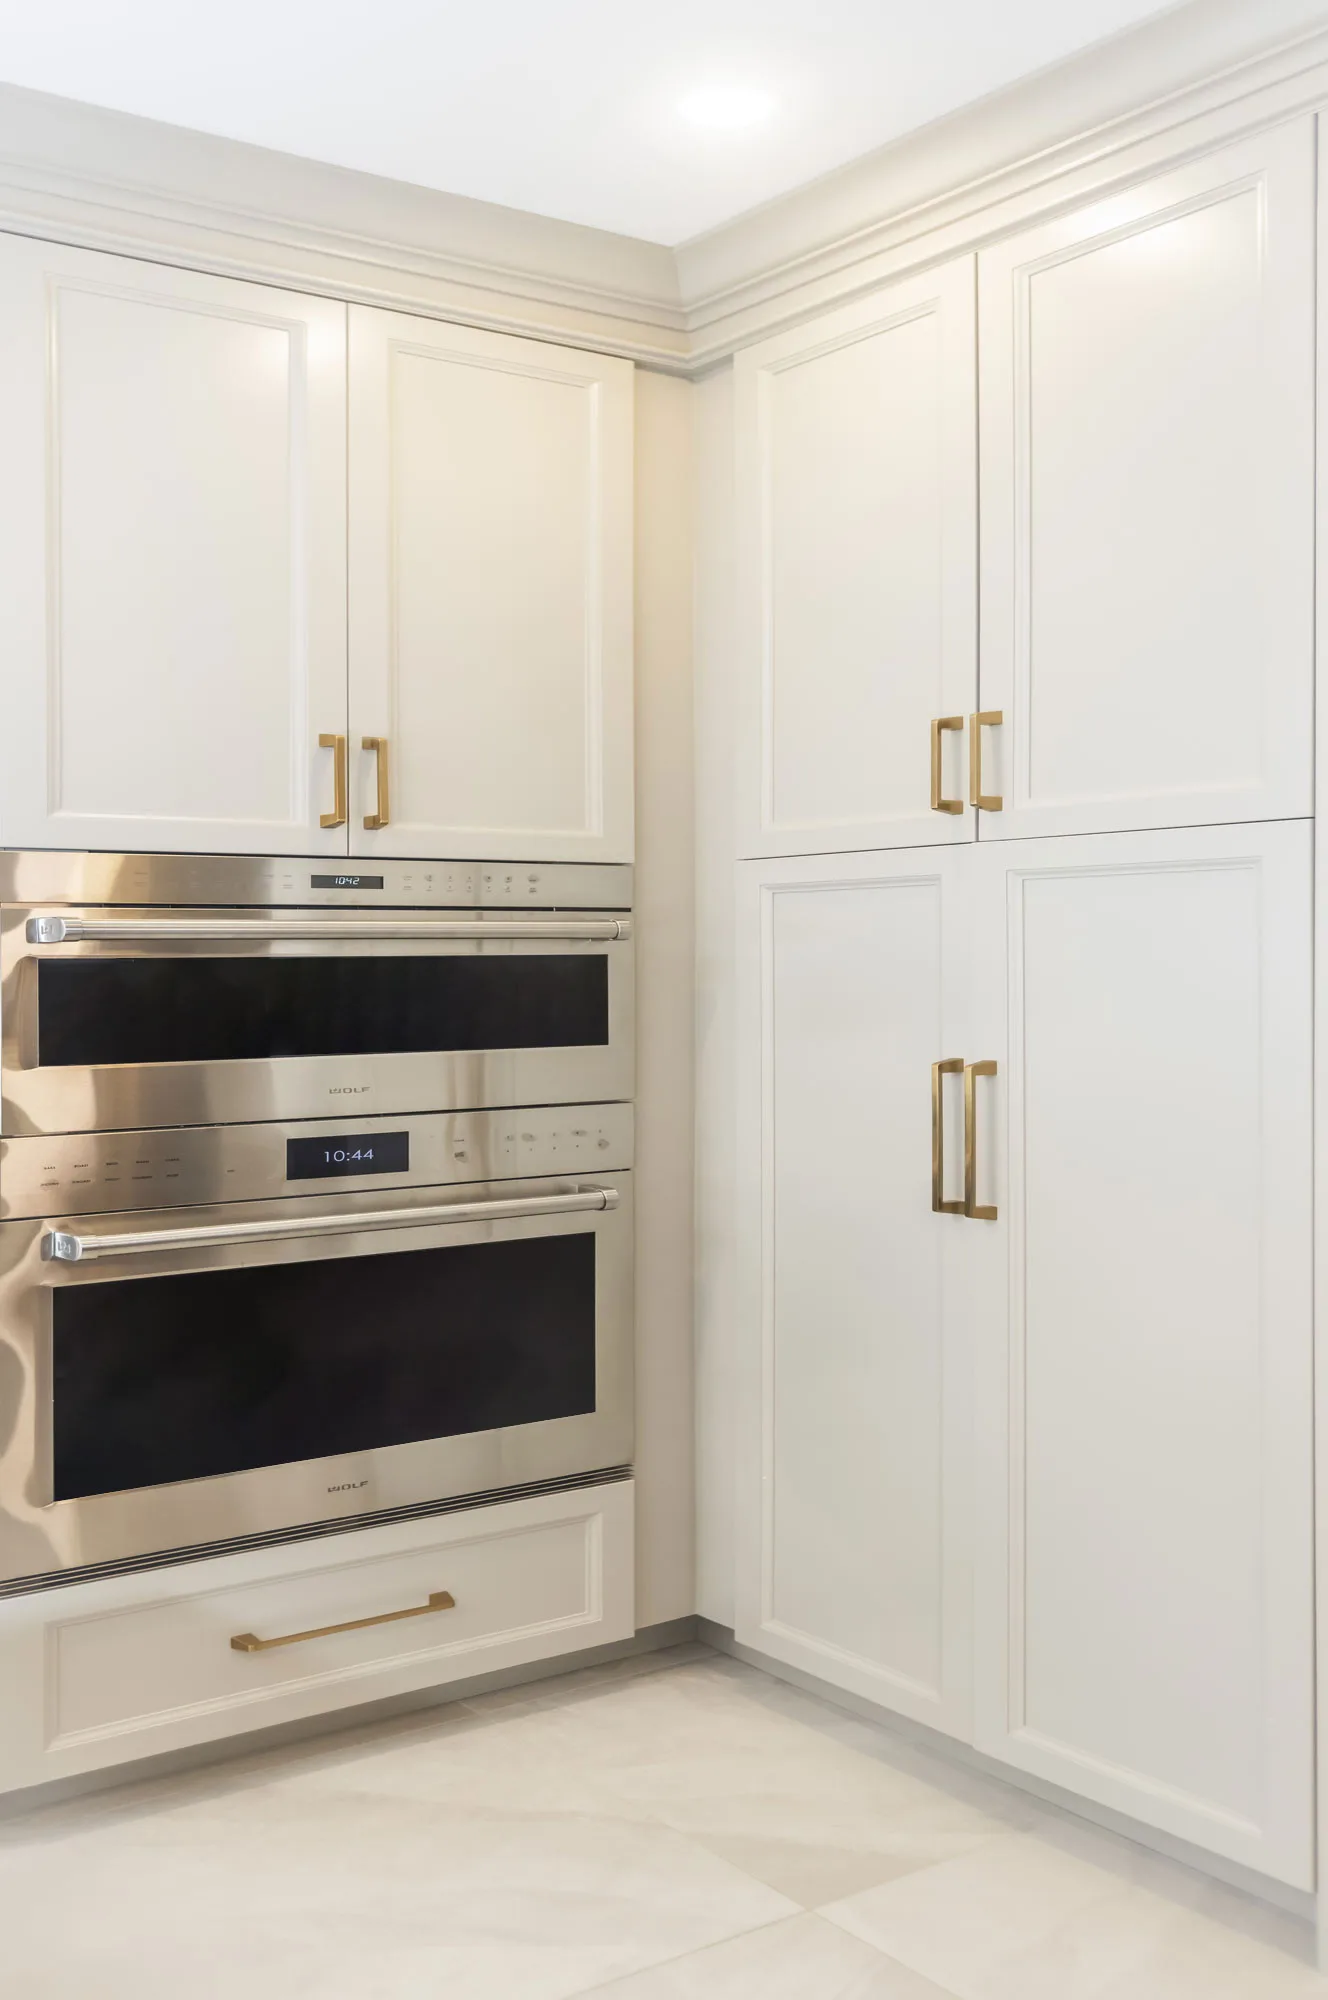 Close up of off-white cabinets and gold hardware with a built in double stainless steel oven